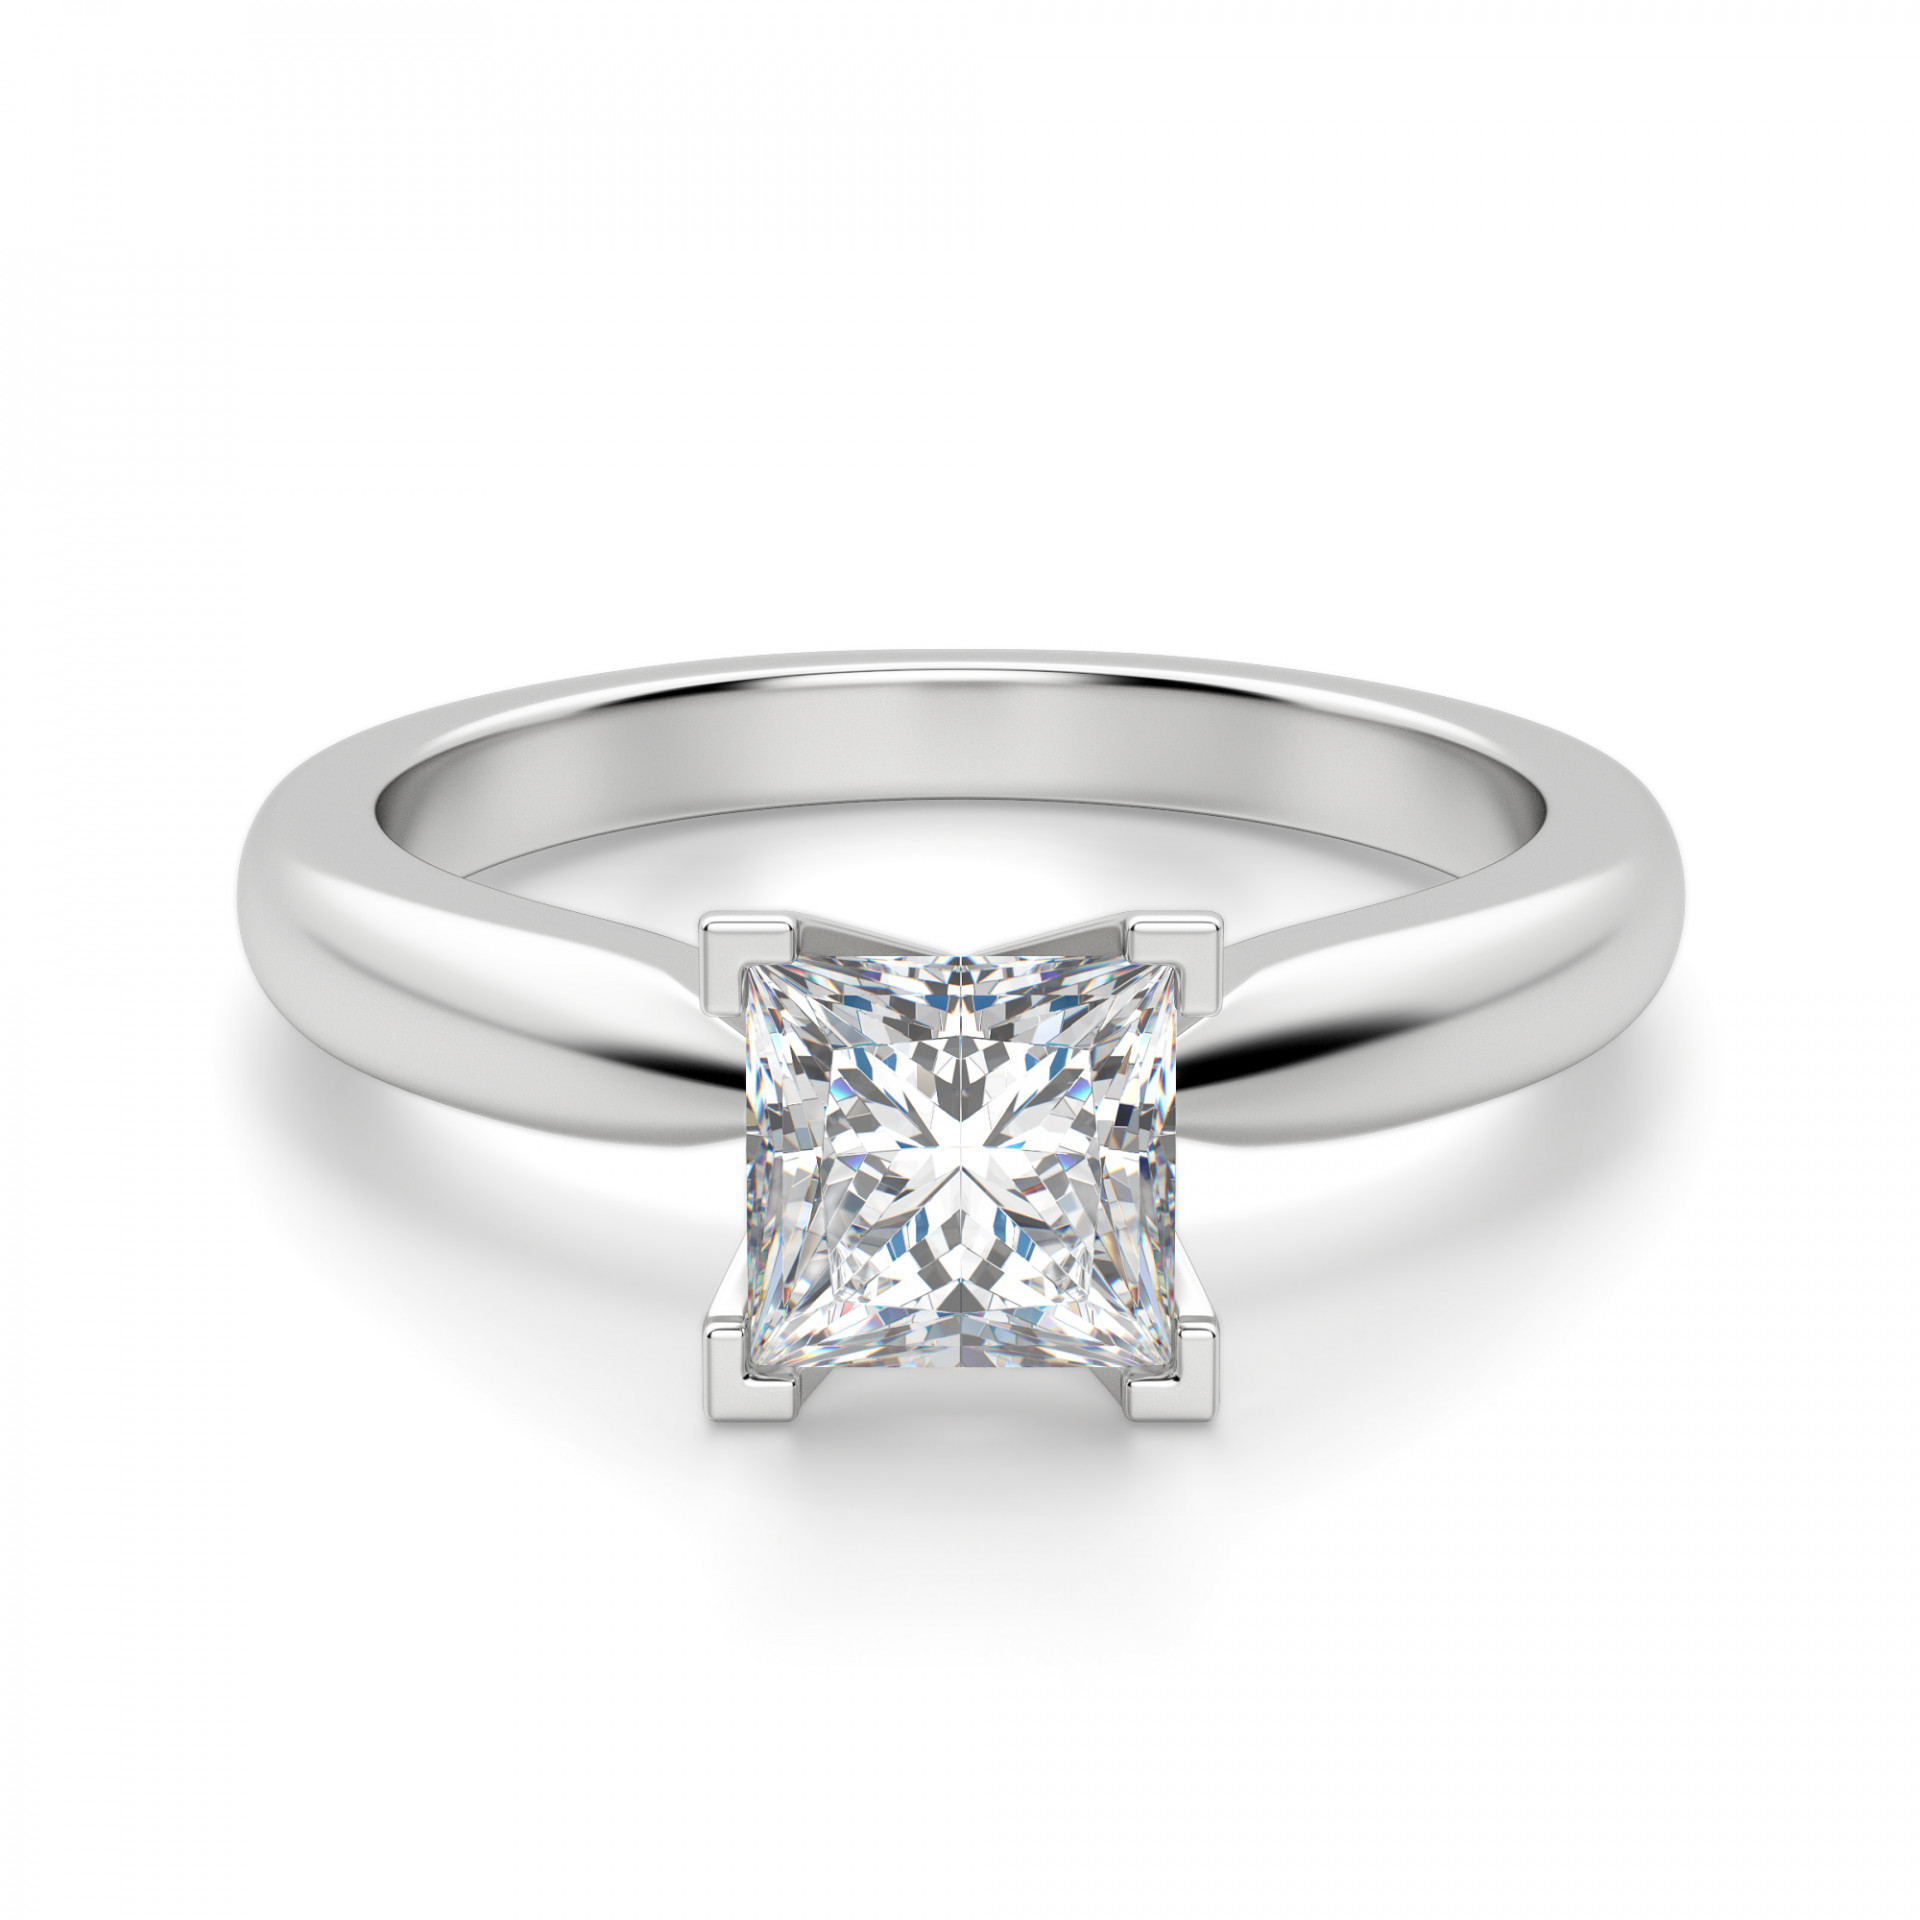  Engagement  Rings  Solitare Tiffany  Style Solitaire 